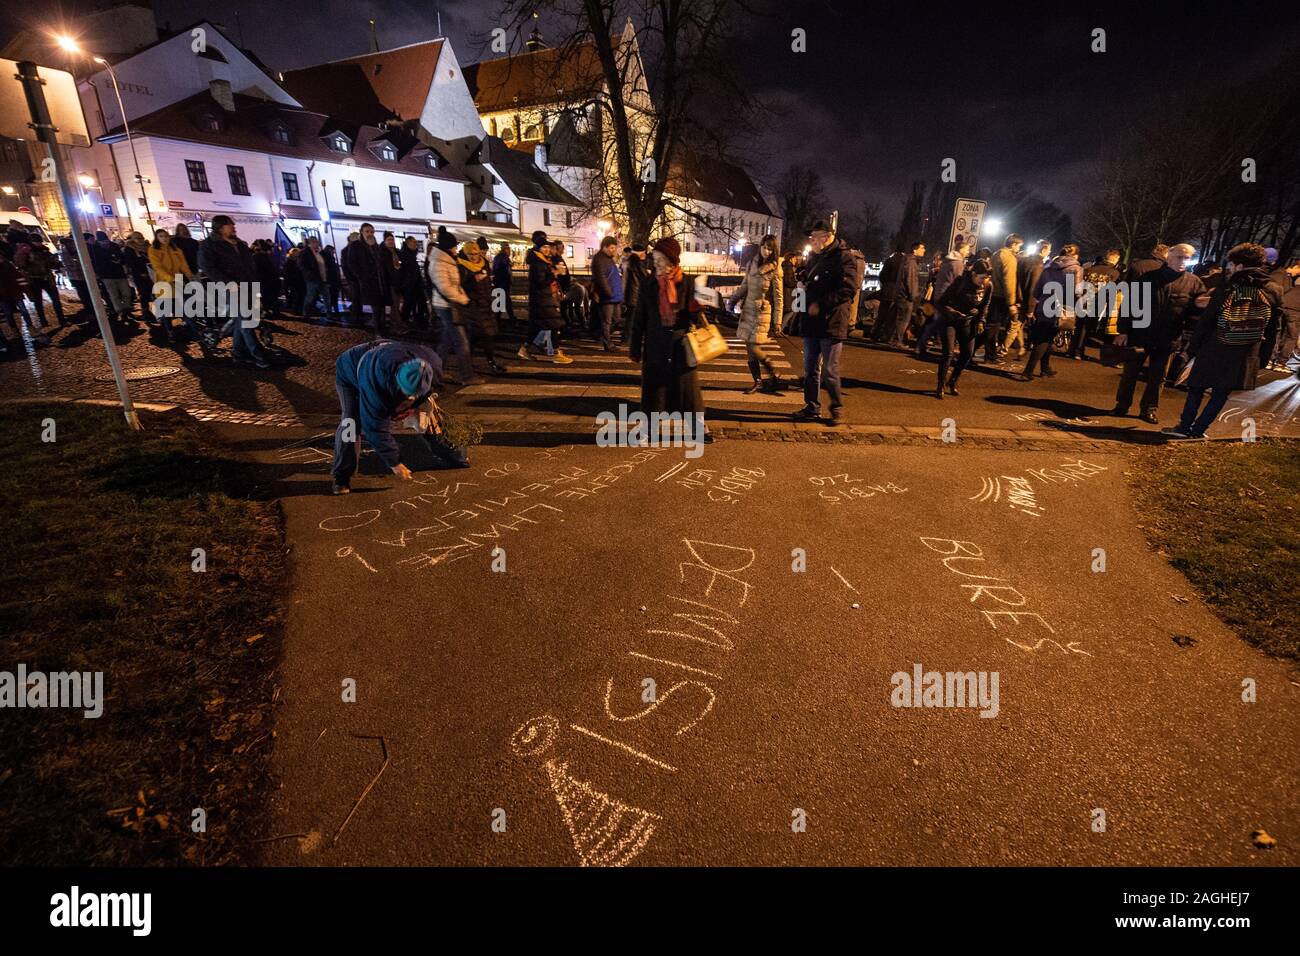 Ceske Budejovice, Czech Republic. 19th Dec, 2019. Demonstrations for Czech Prime Minister Andrej Babis's resignation, staged by Million Moments NGO, take place in all regional capitals except for Prague, on December 19, 2019. On the photo is seen demonstration in Budweis. Credit: Vaclav Pancer/CTK Photo/Alamy Live News Stock Photo